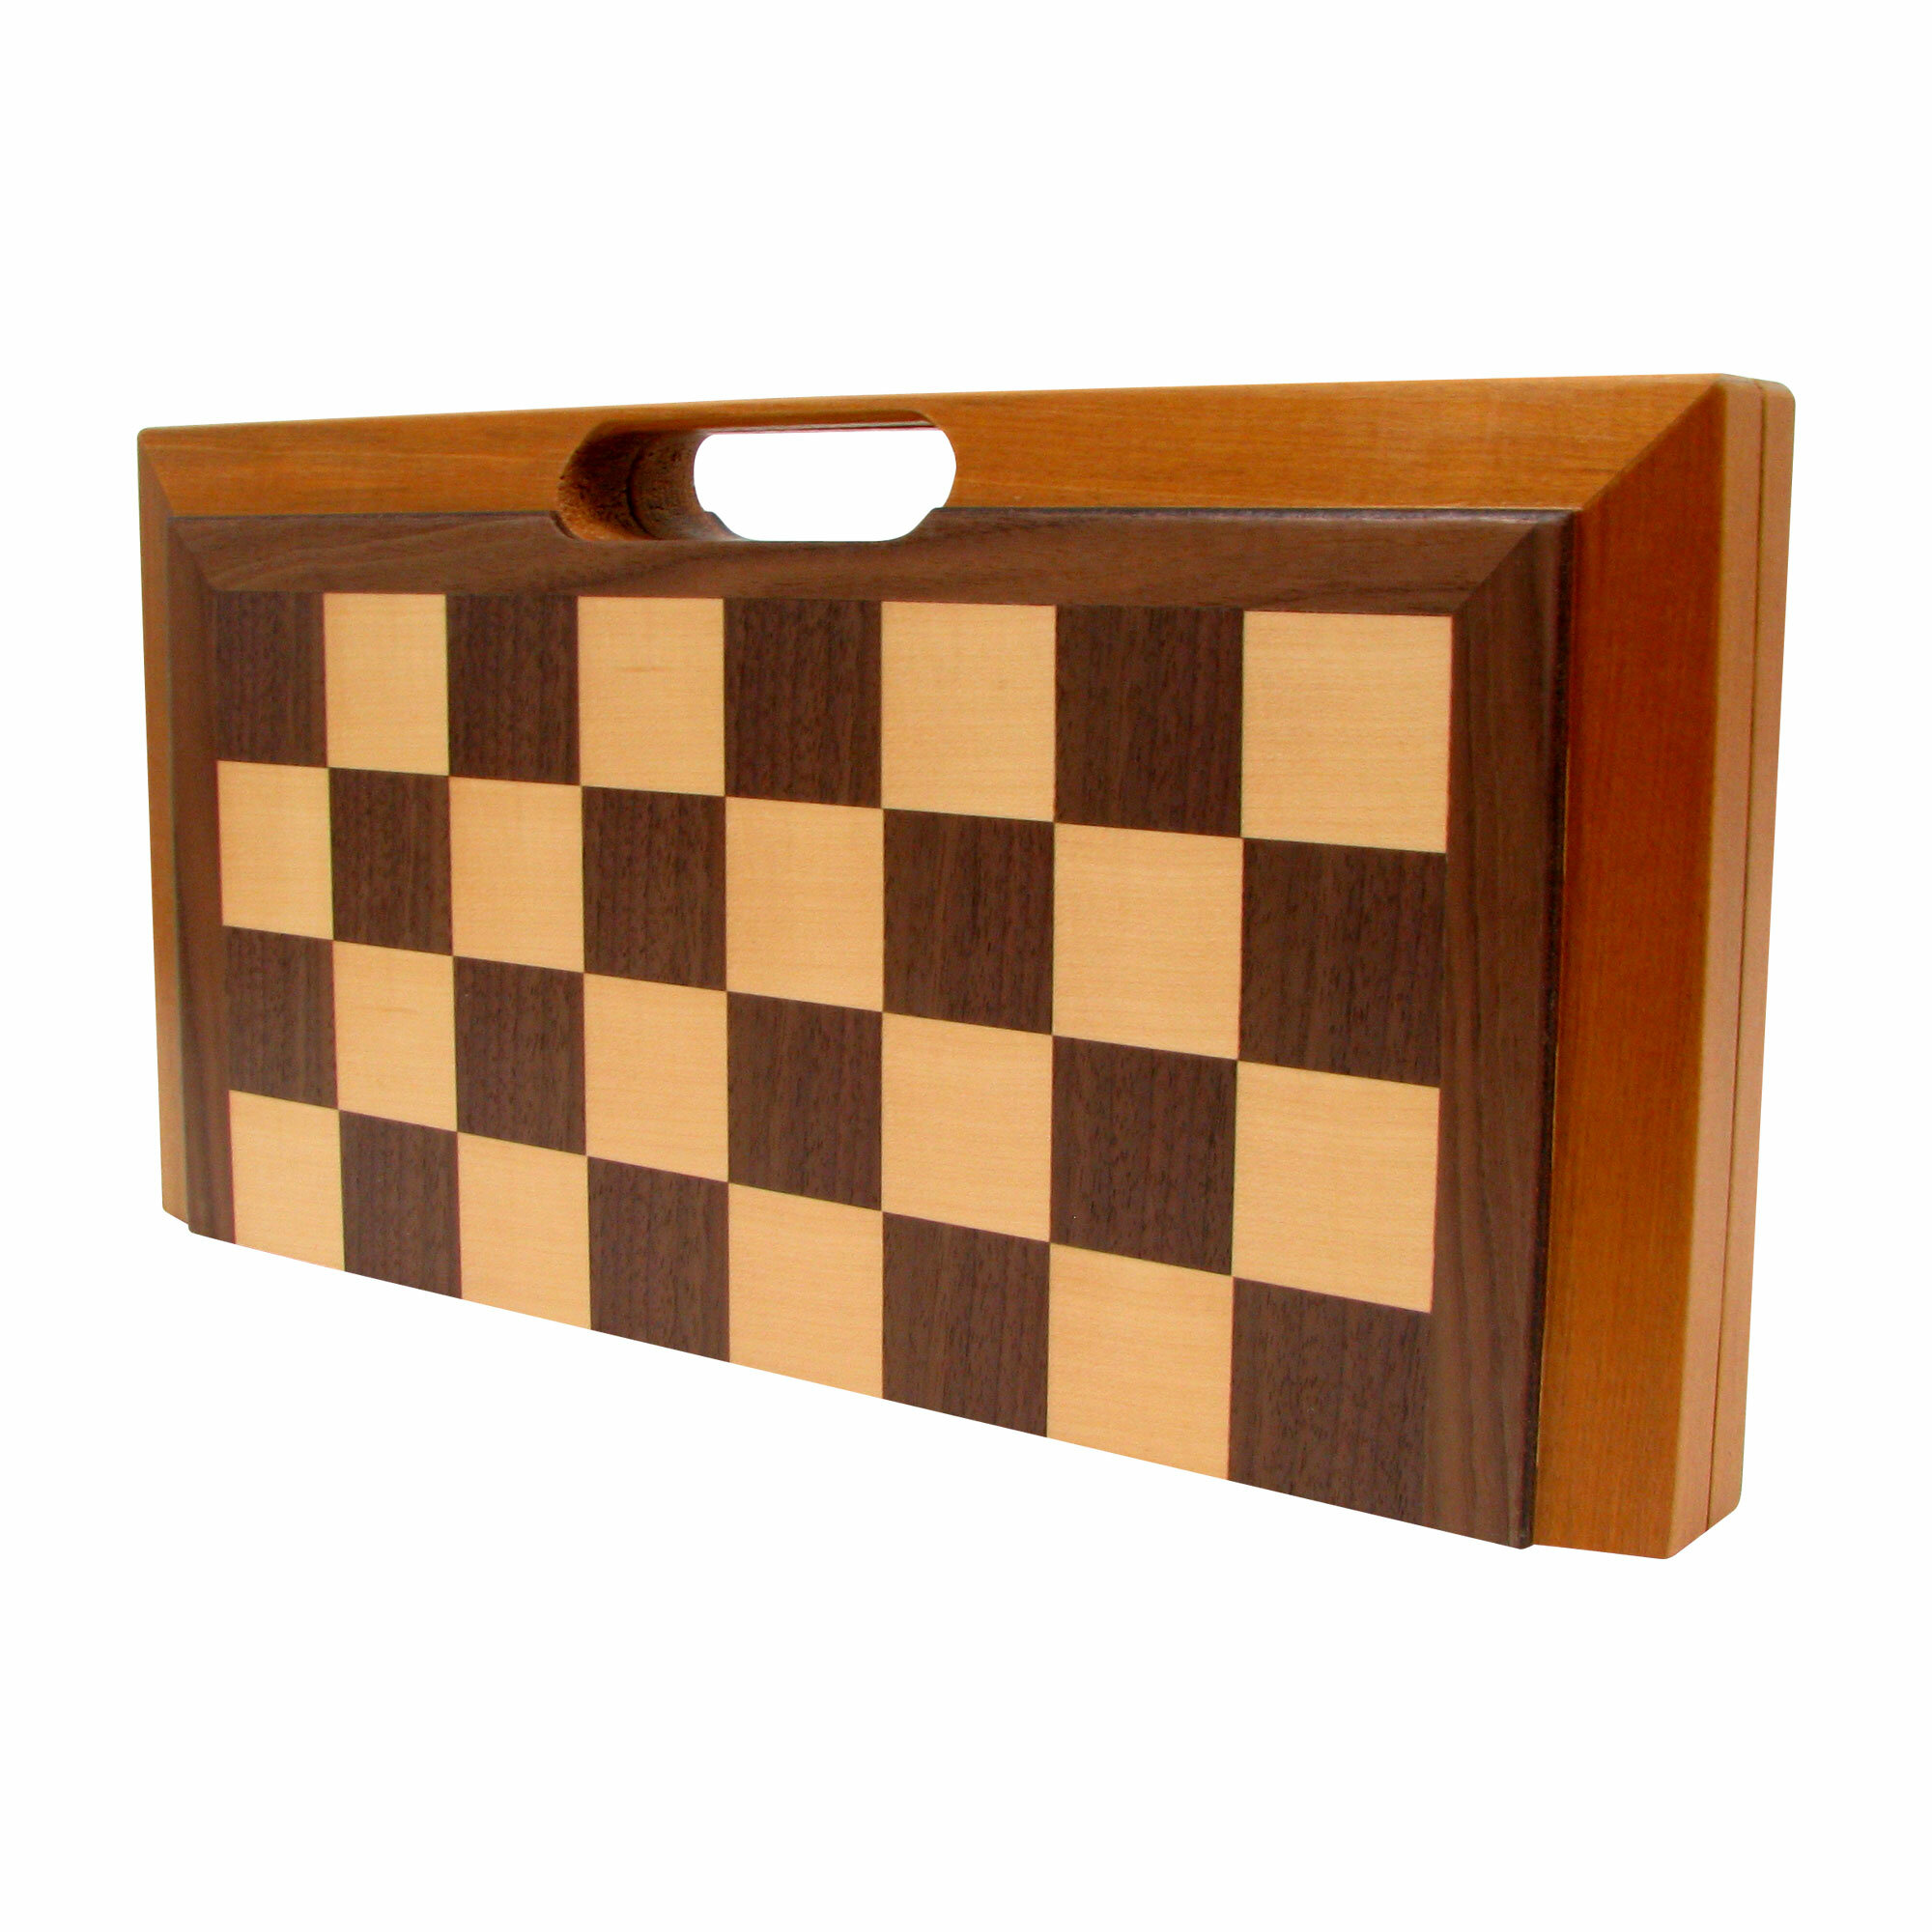 Board Game Trademark Games Deluxe Wooden Chess Checker And Backgammon Set Brown 